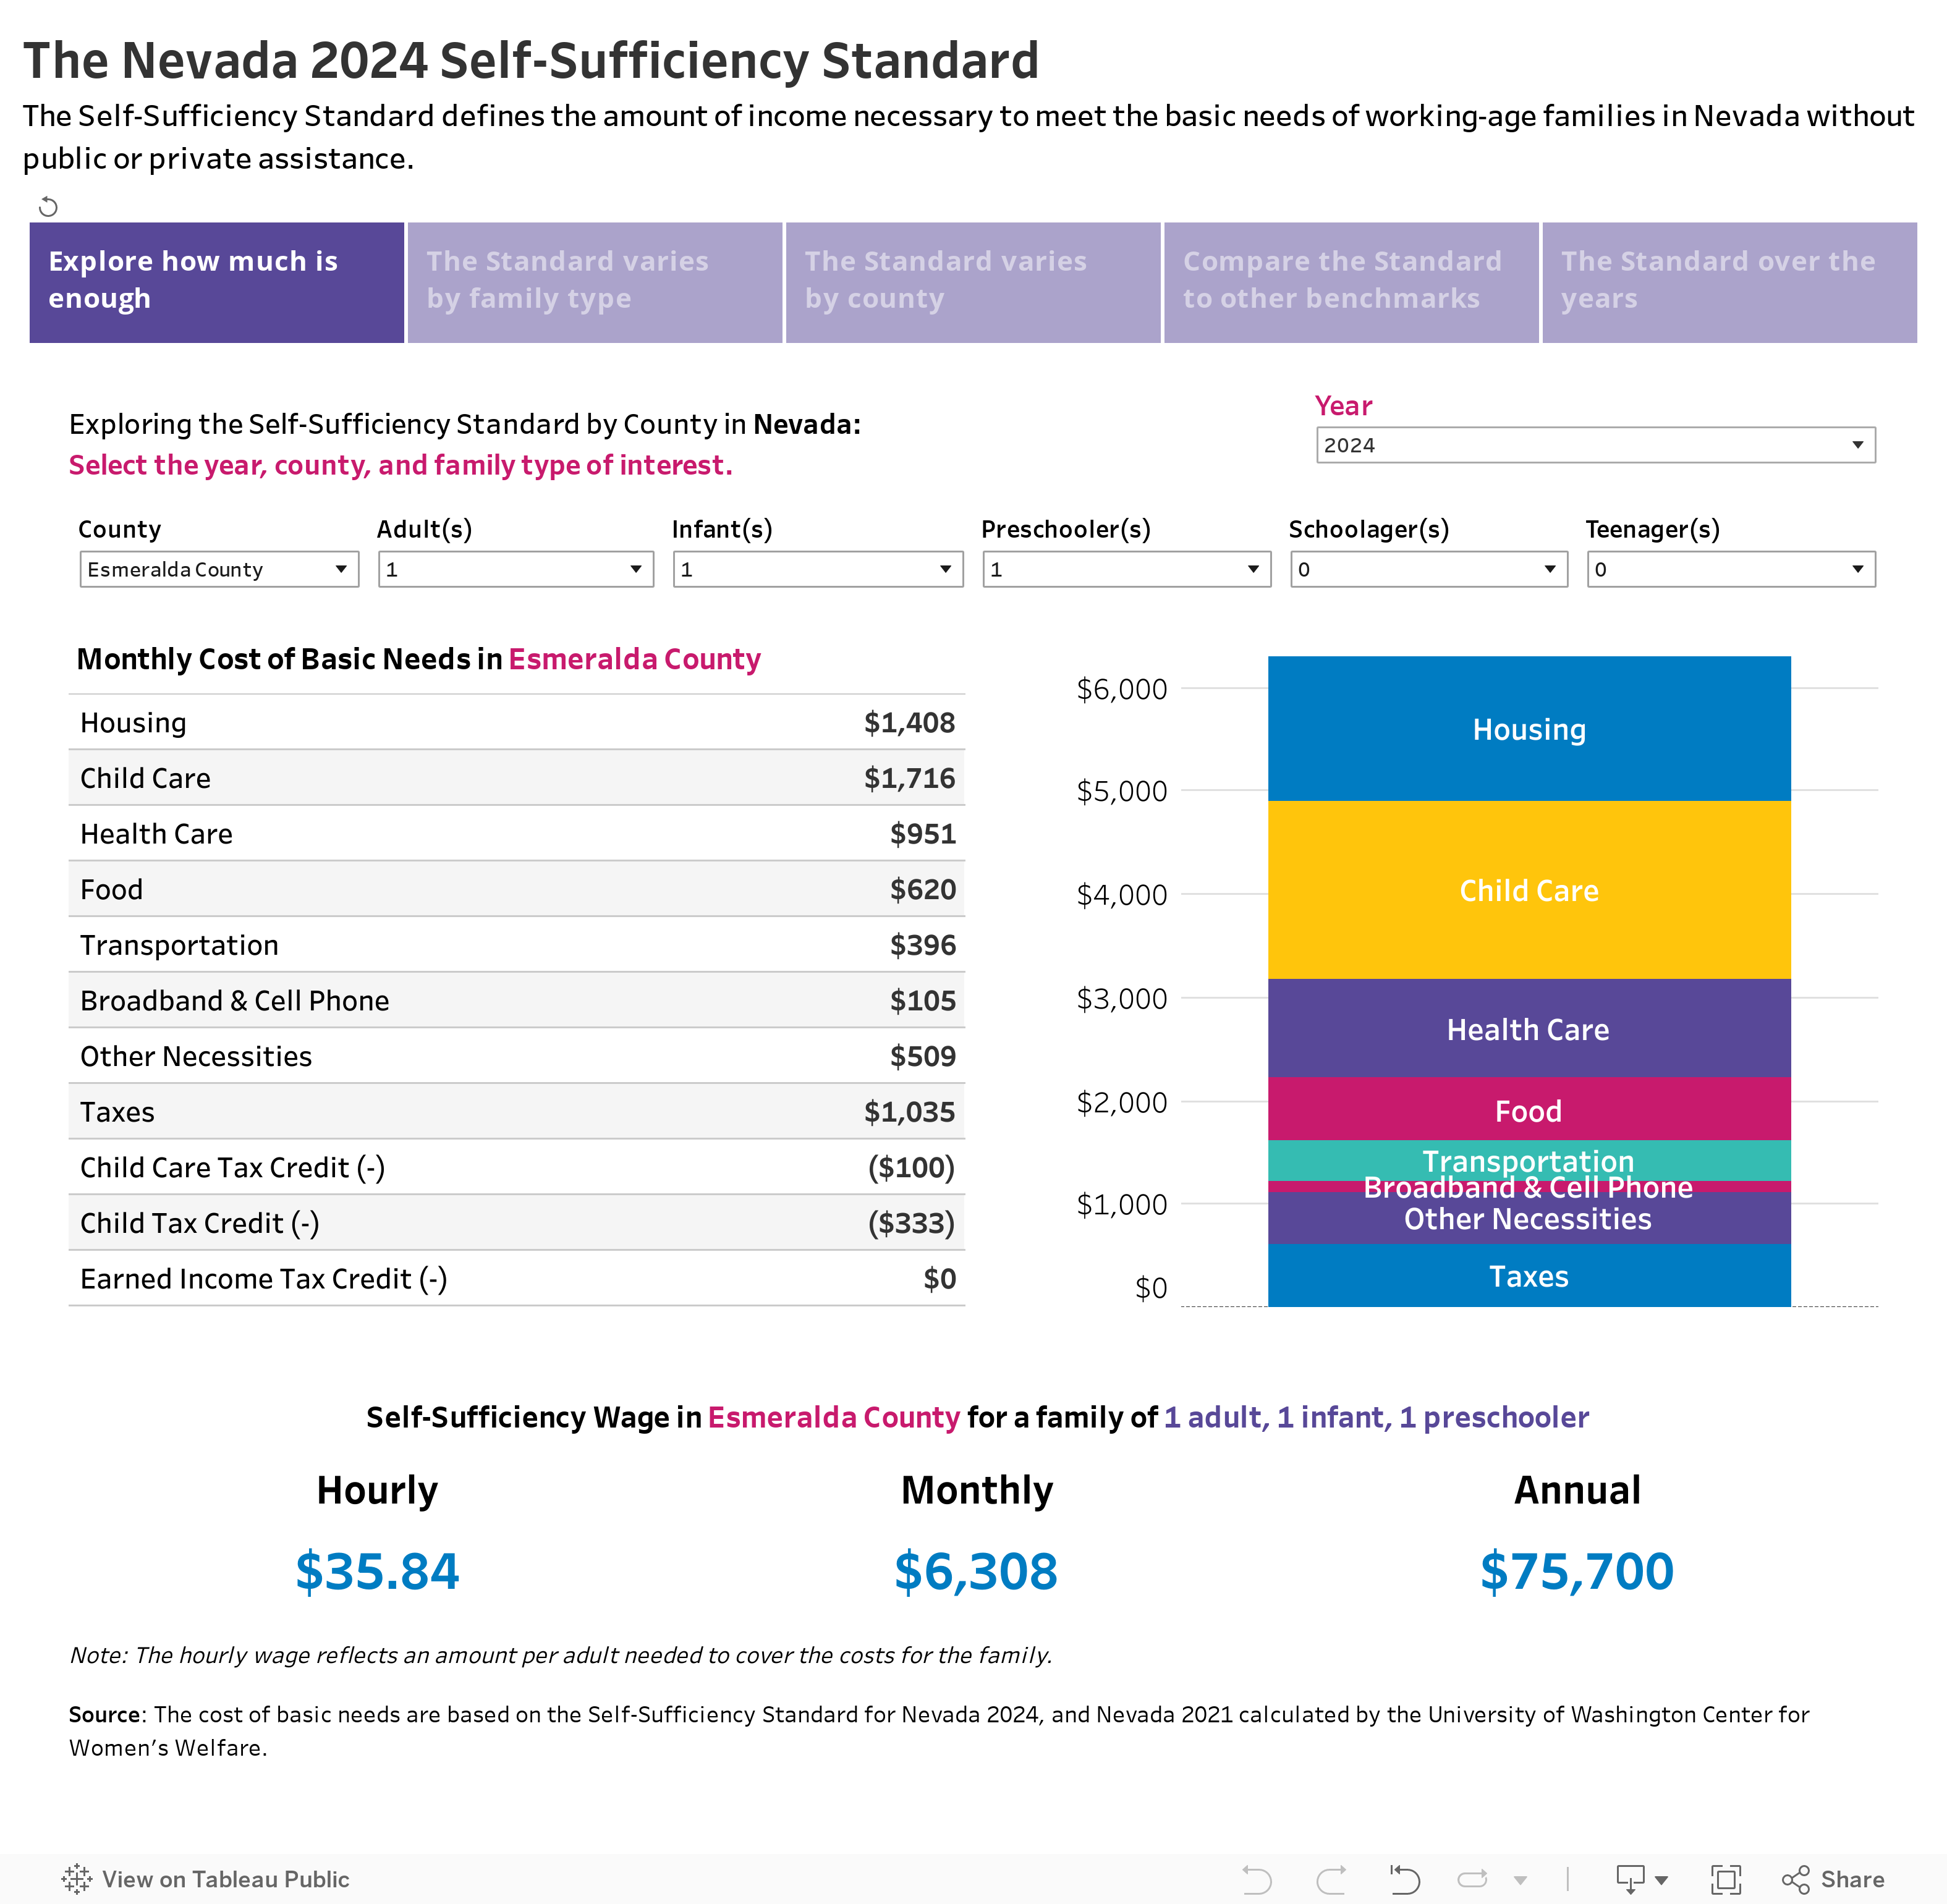 The Nevada 2024 Self-Sufficiency Standard The Self-Sufficiency Standard defines the amount of income necessary to meet the basic needs of working-age families in Nevada without public or private assistance. 